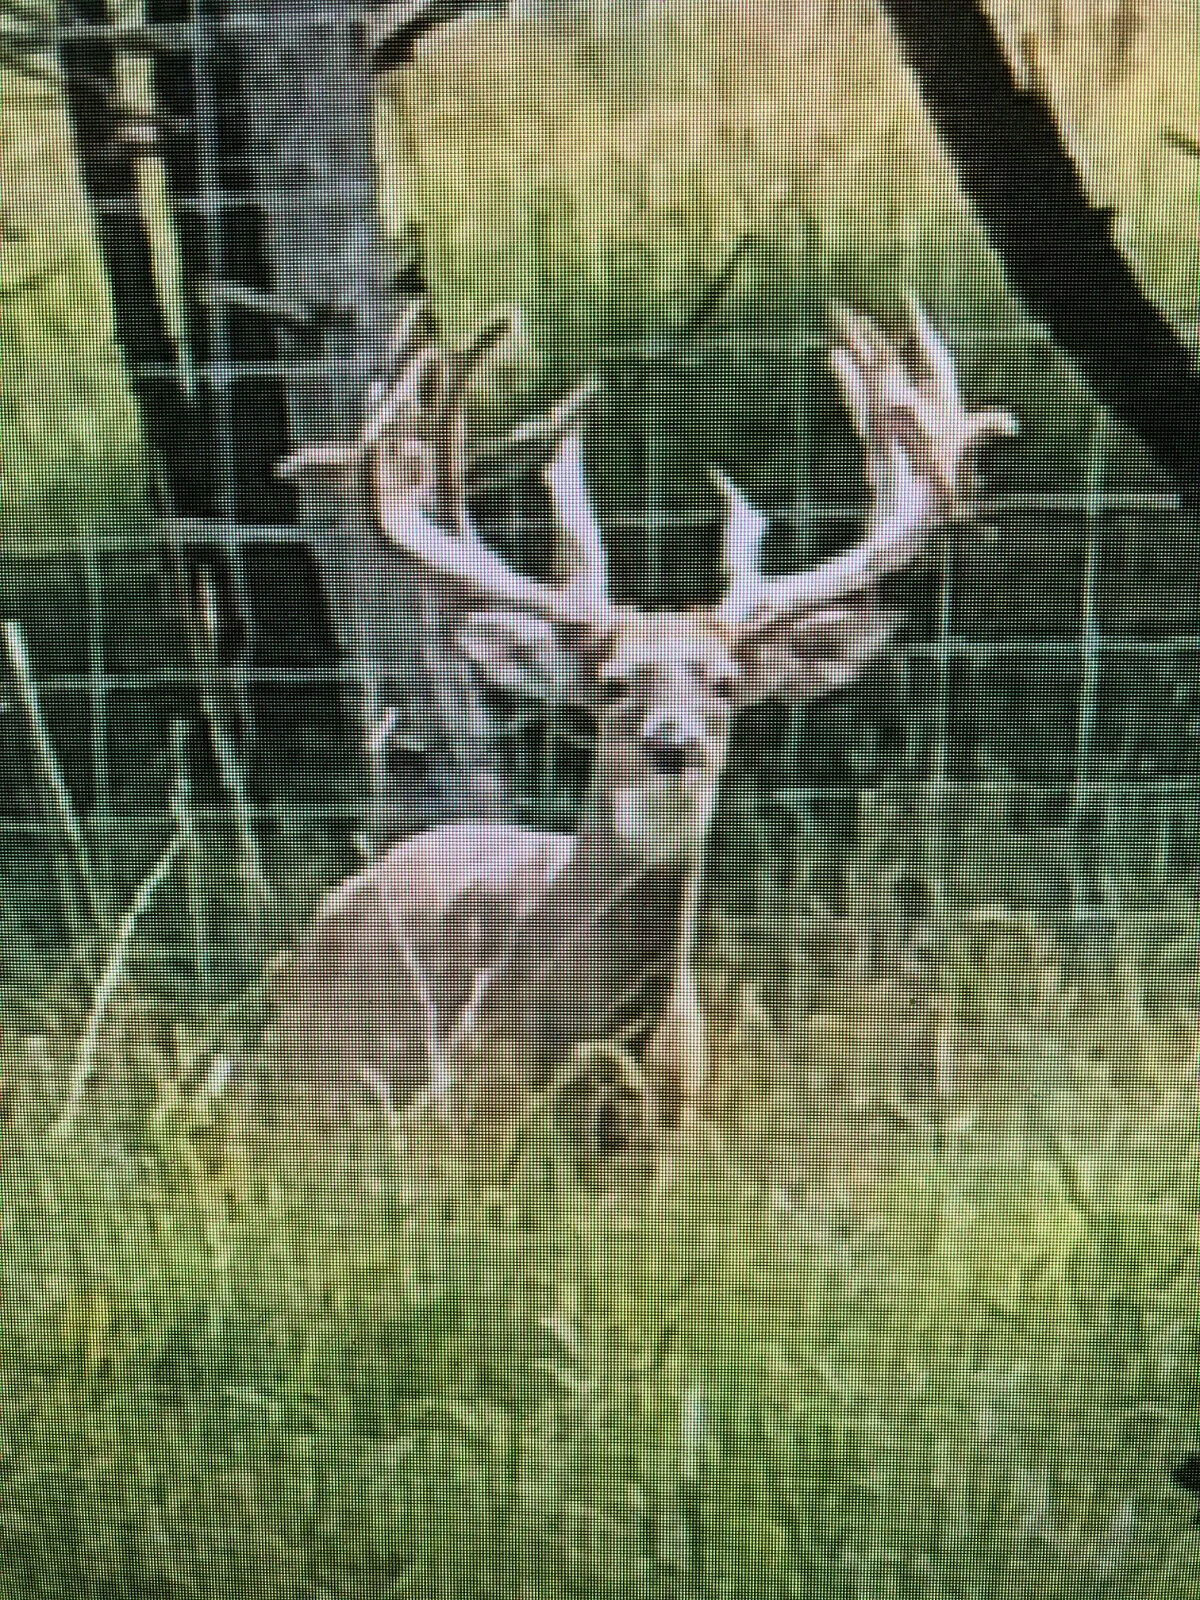 Hunting 2021 Trophy Whitetail Deer Buck Hunts Pa Guided